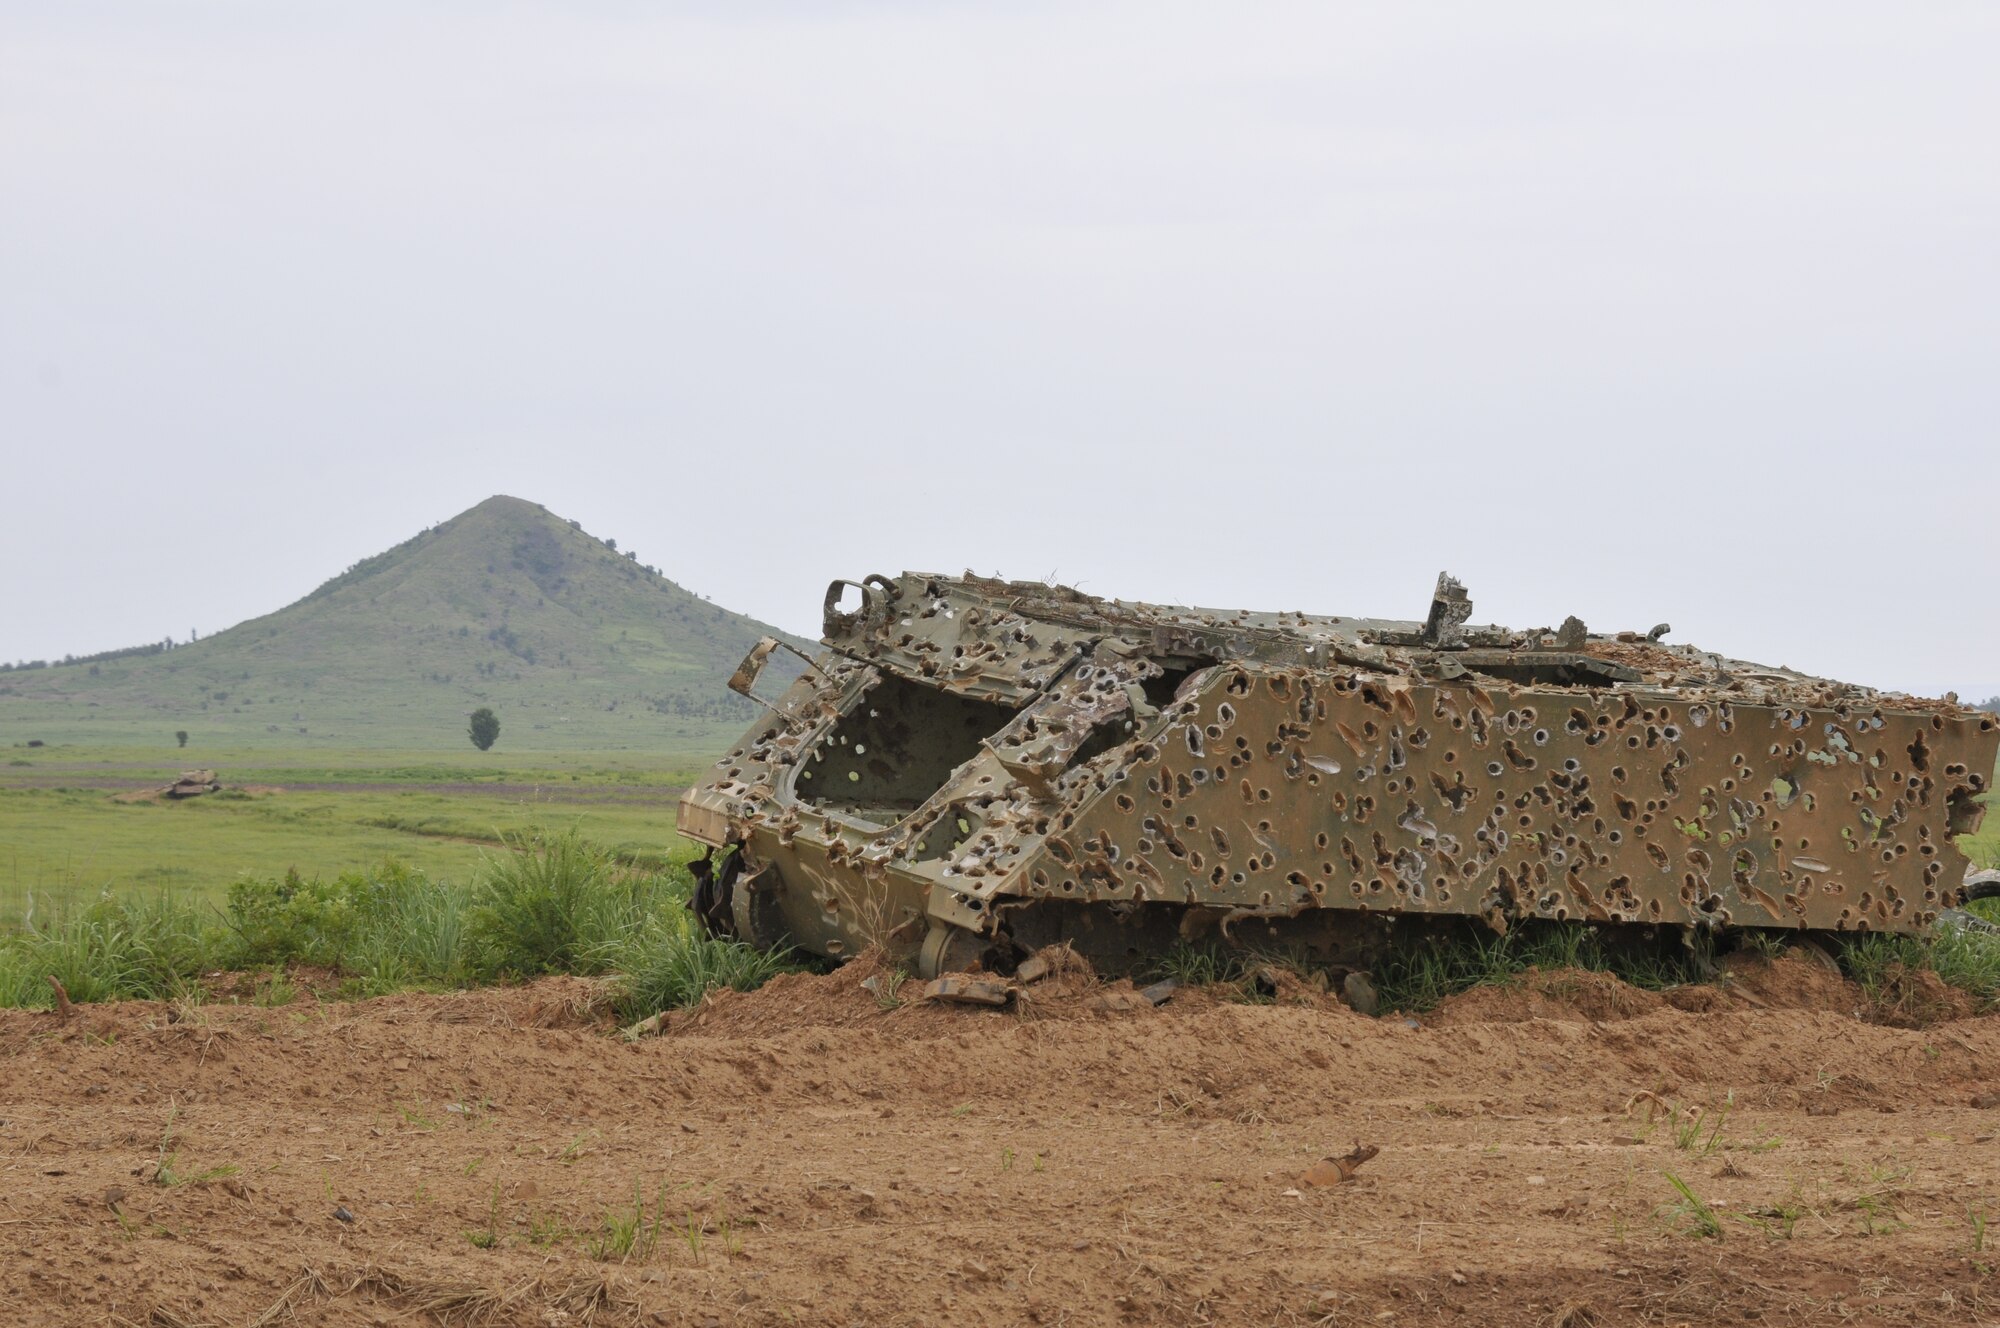 A US M-113 Armored Personnel Carrier sits with Potato Hill in the background at 188th Wing Detachment 1 Razorback Range at Fort Chaffee Maneuver Training Center, Arkansas, July 14, 2014. The range is maintained by the 188th and provides varying types of training to military units from around the world. (U.S. Air National Guard photo by Staff Sgt. John Suleski/released)